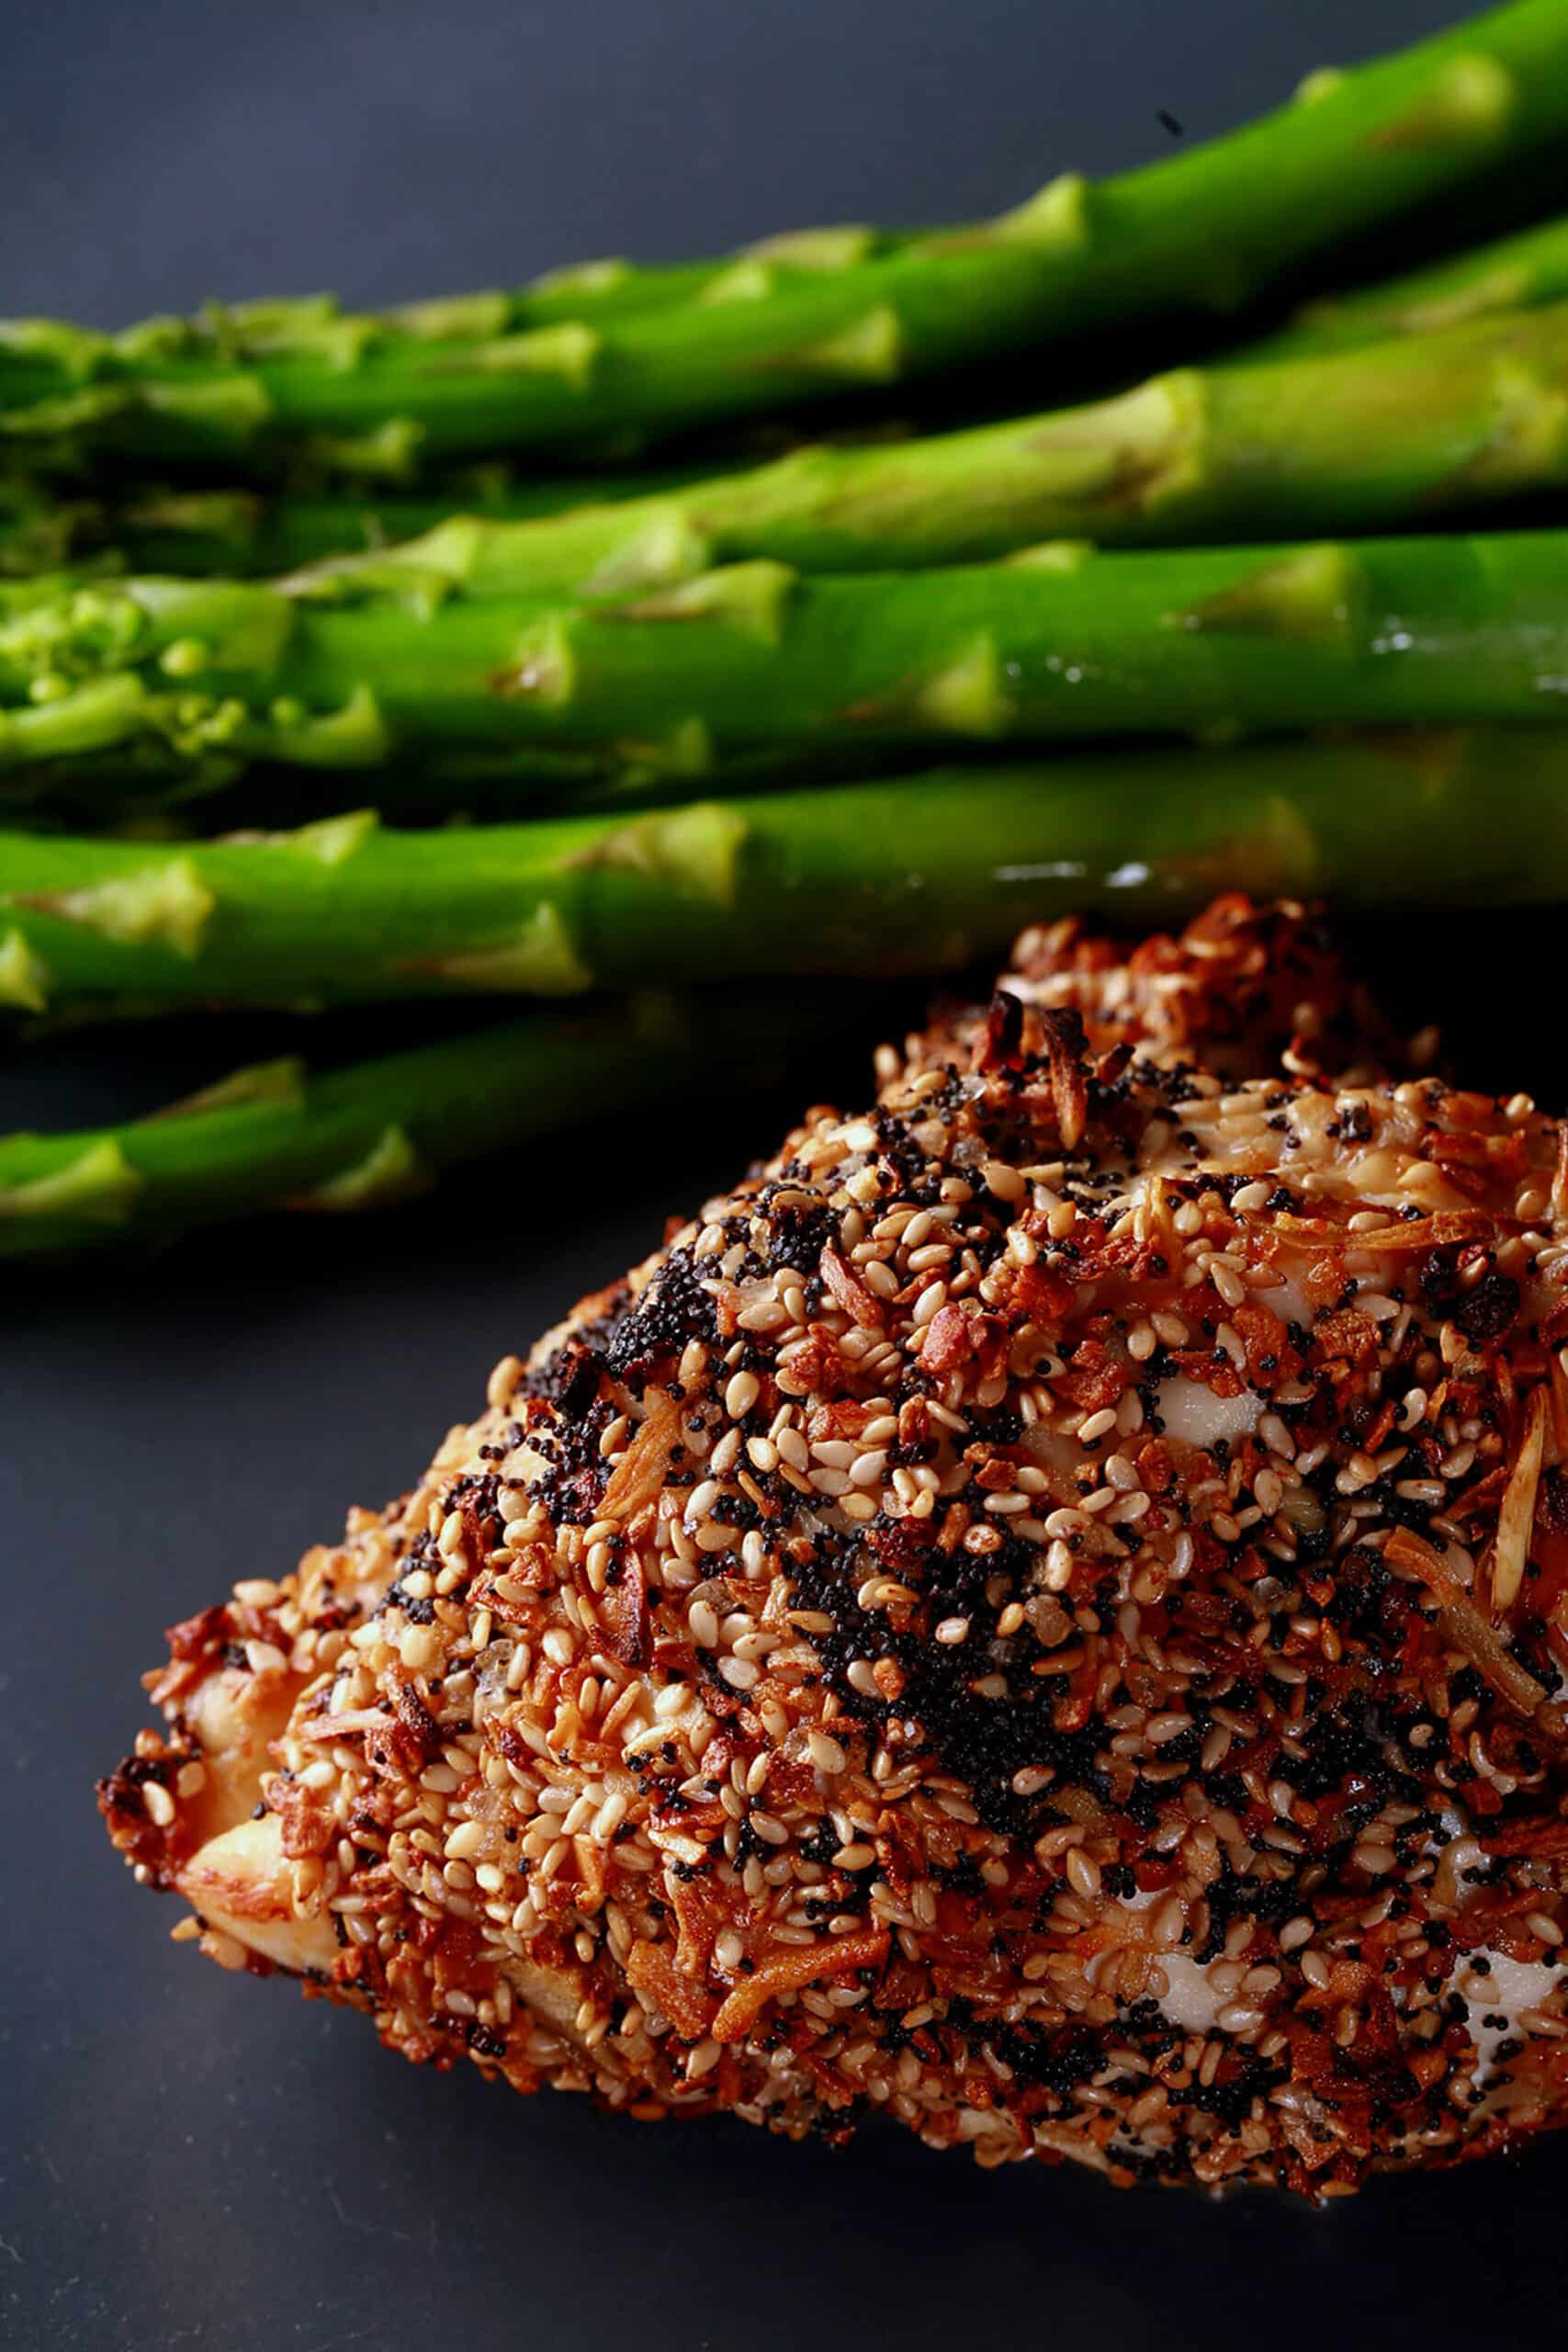 A roasted cream cheese stuffed everything chicken breast on a plate with some asparagus.